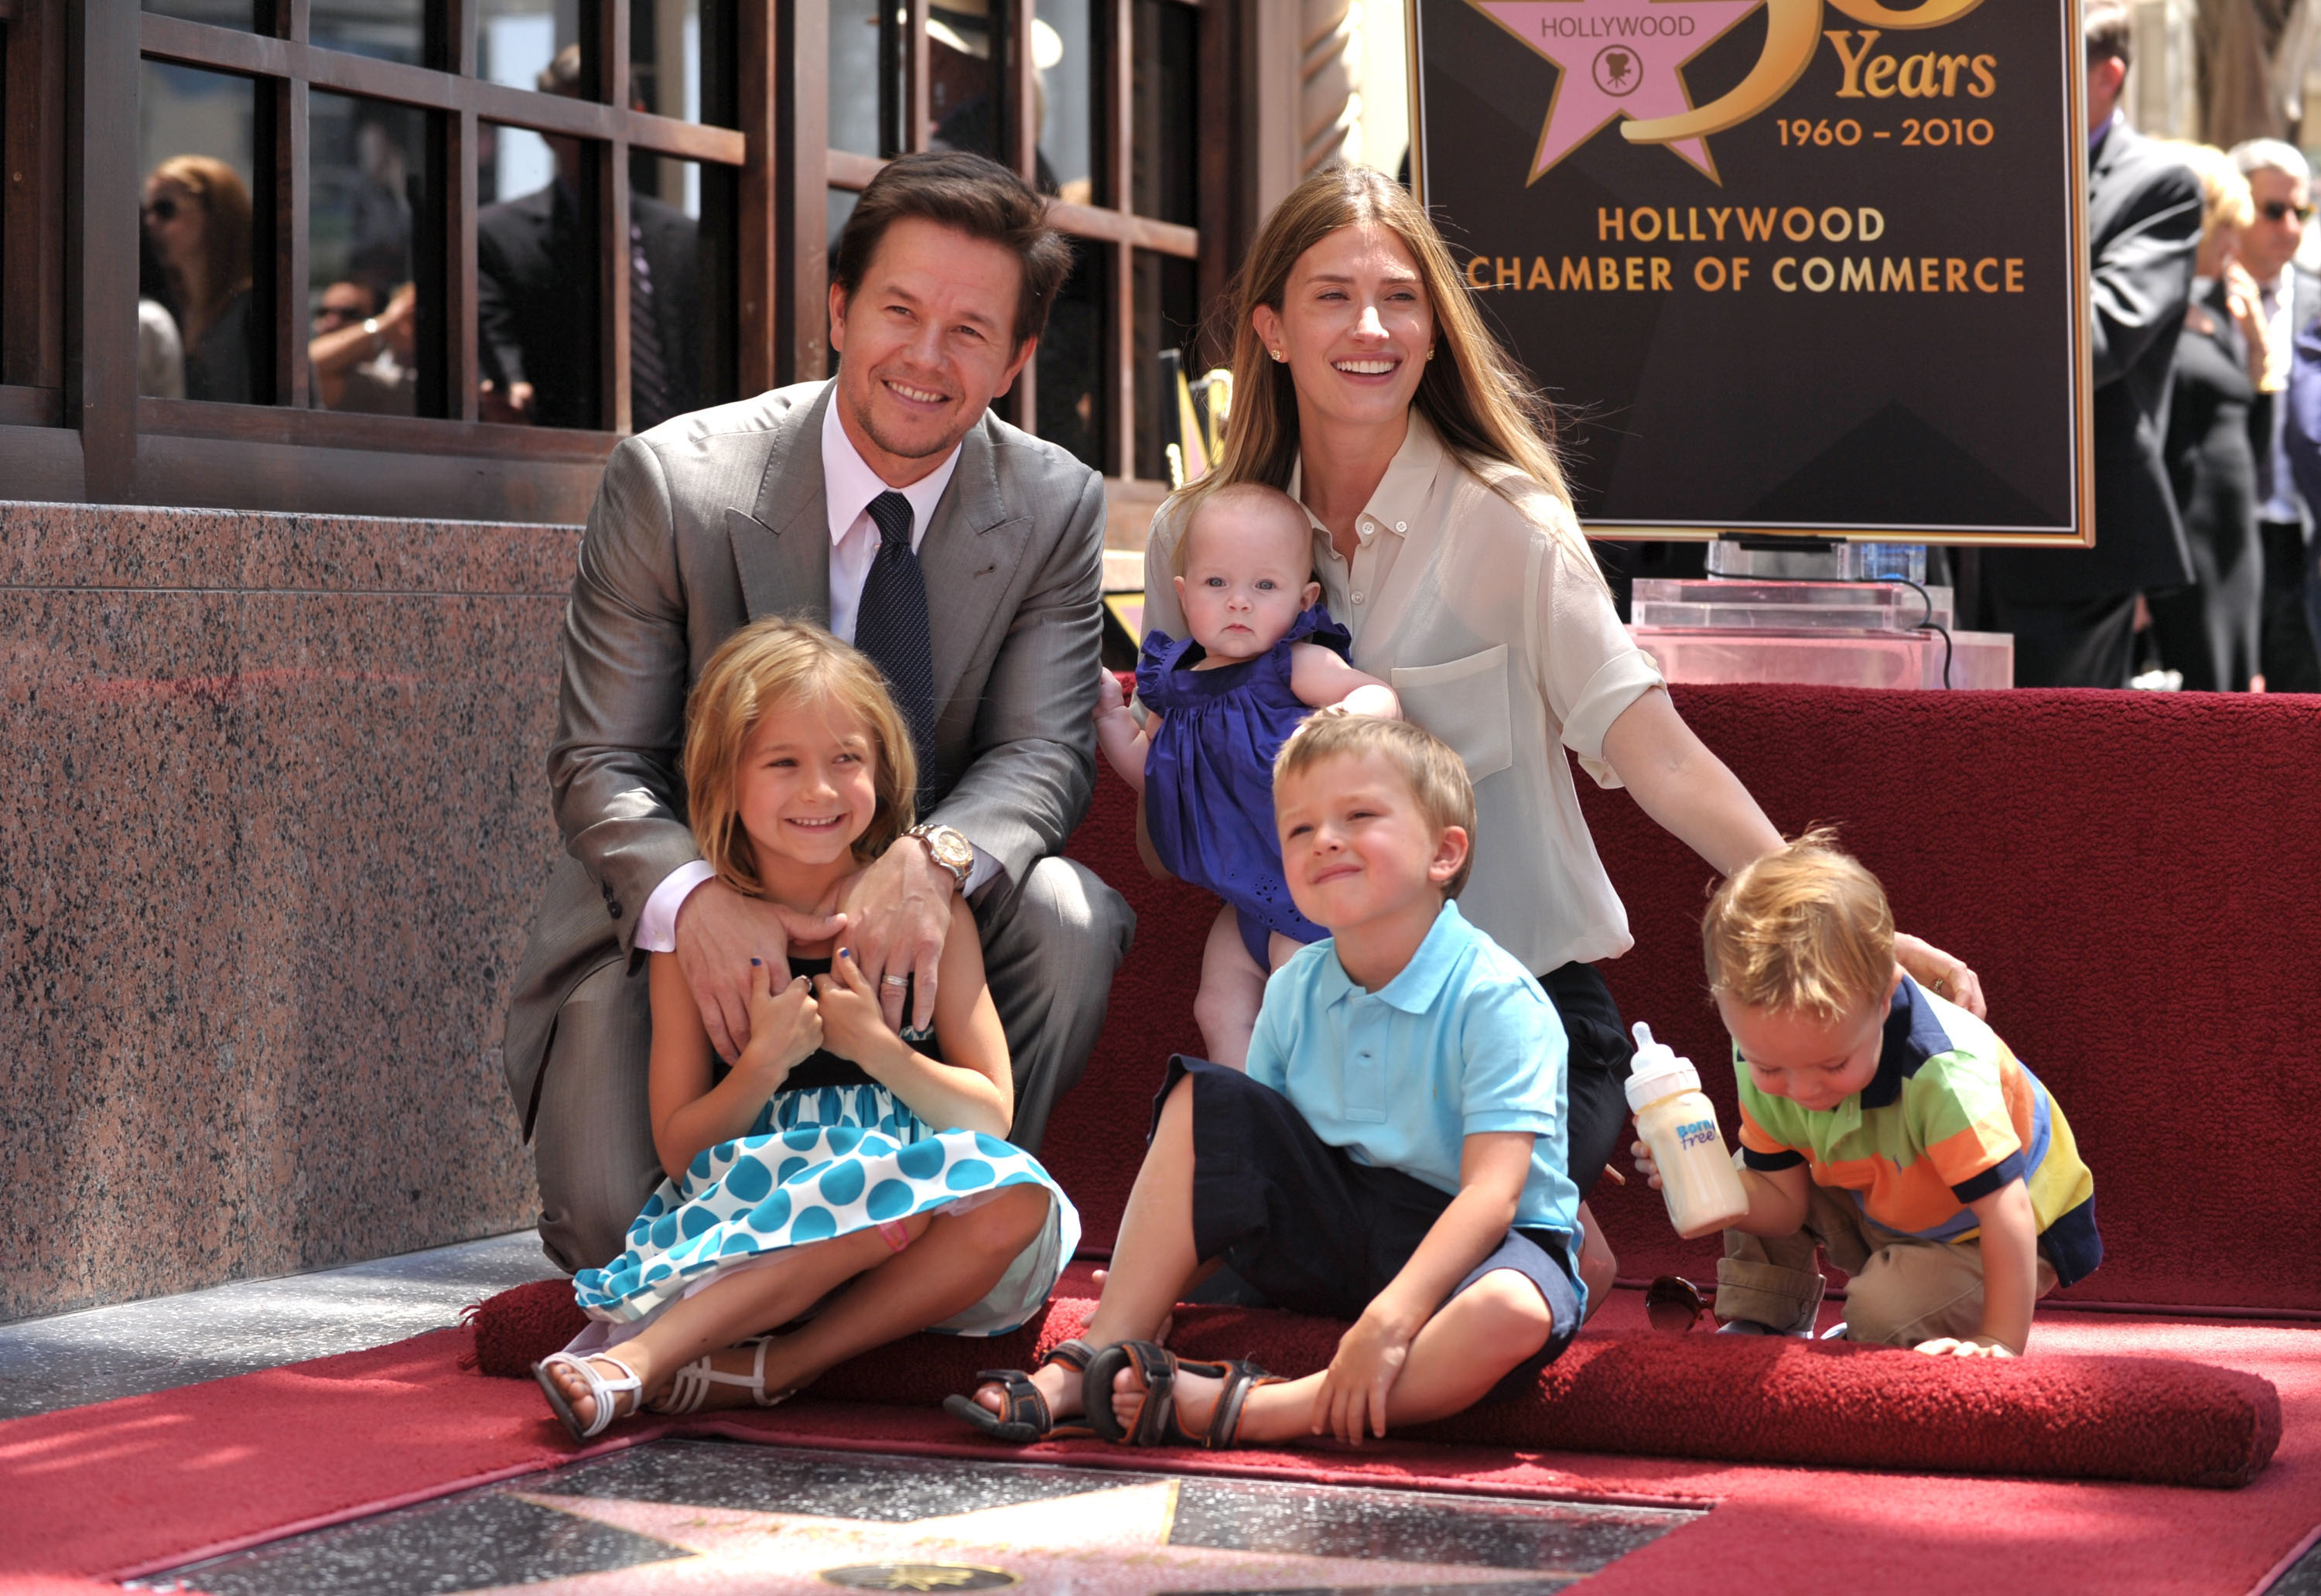 Mark Wahlberg and Rhea Durham with Ella, Michael, Brendan, and Grace Wahlberg on July 29, 2010 in Hollywood, California | Source: Getty Images